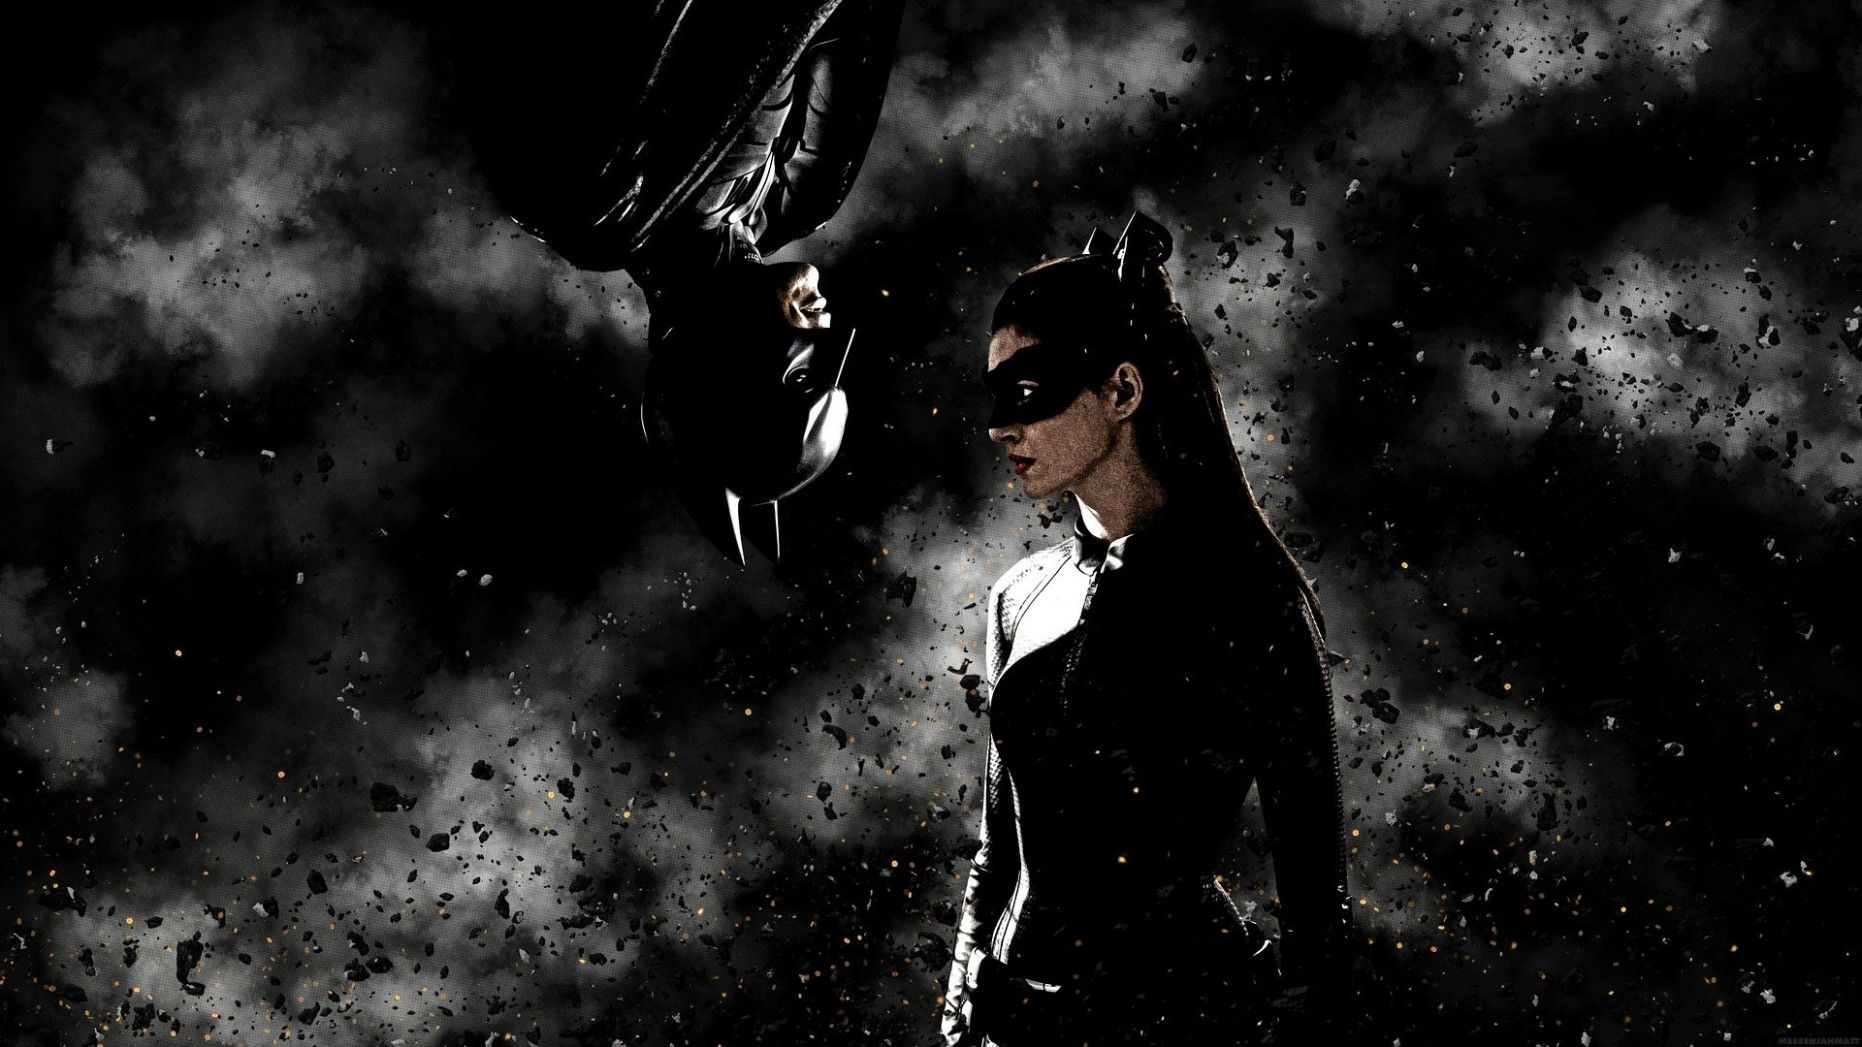 Catwoman and Batman Wallpaper Free Catwoman and Batman Background